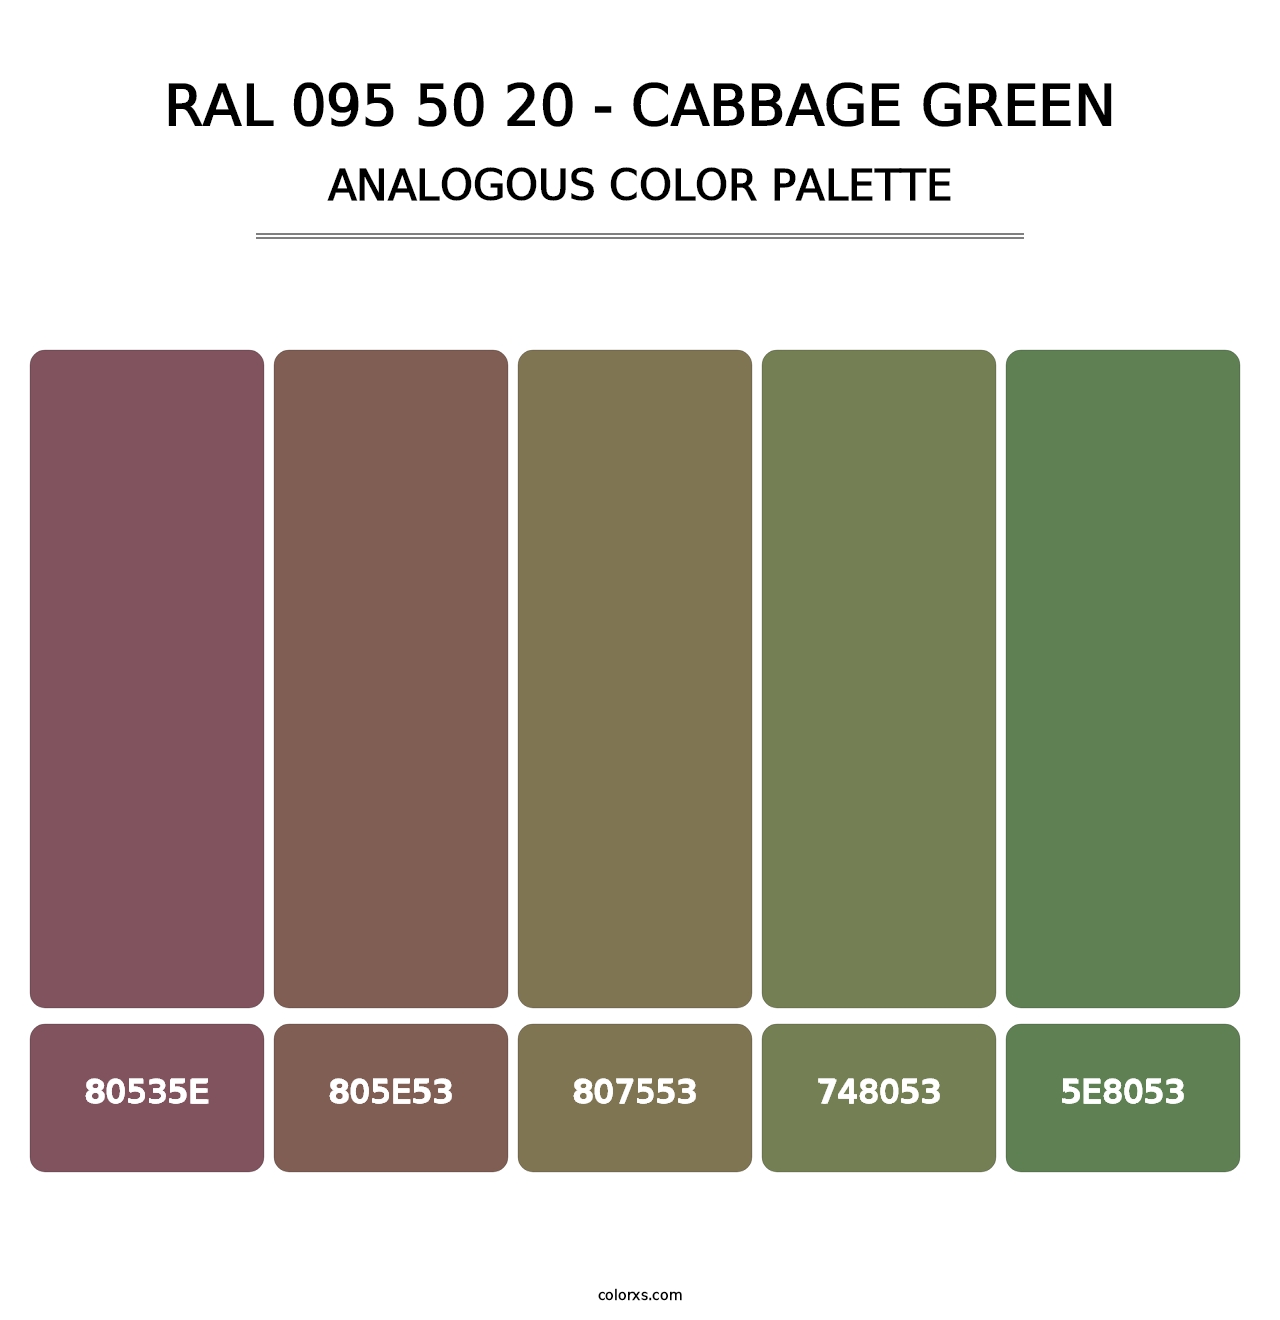 RAL 095 50 20 - Cabbage Green - Analogous Color Palette